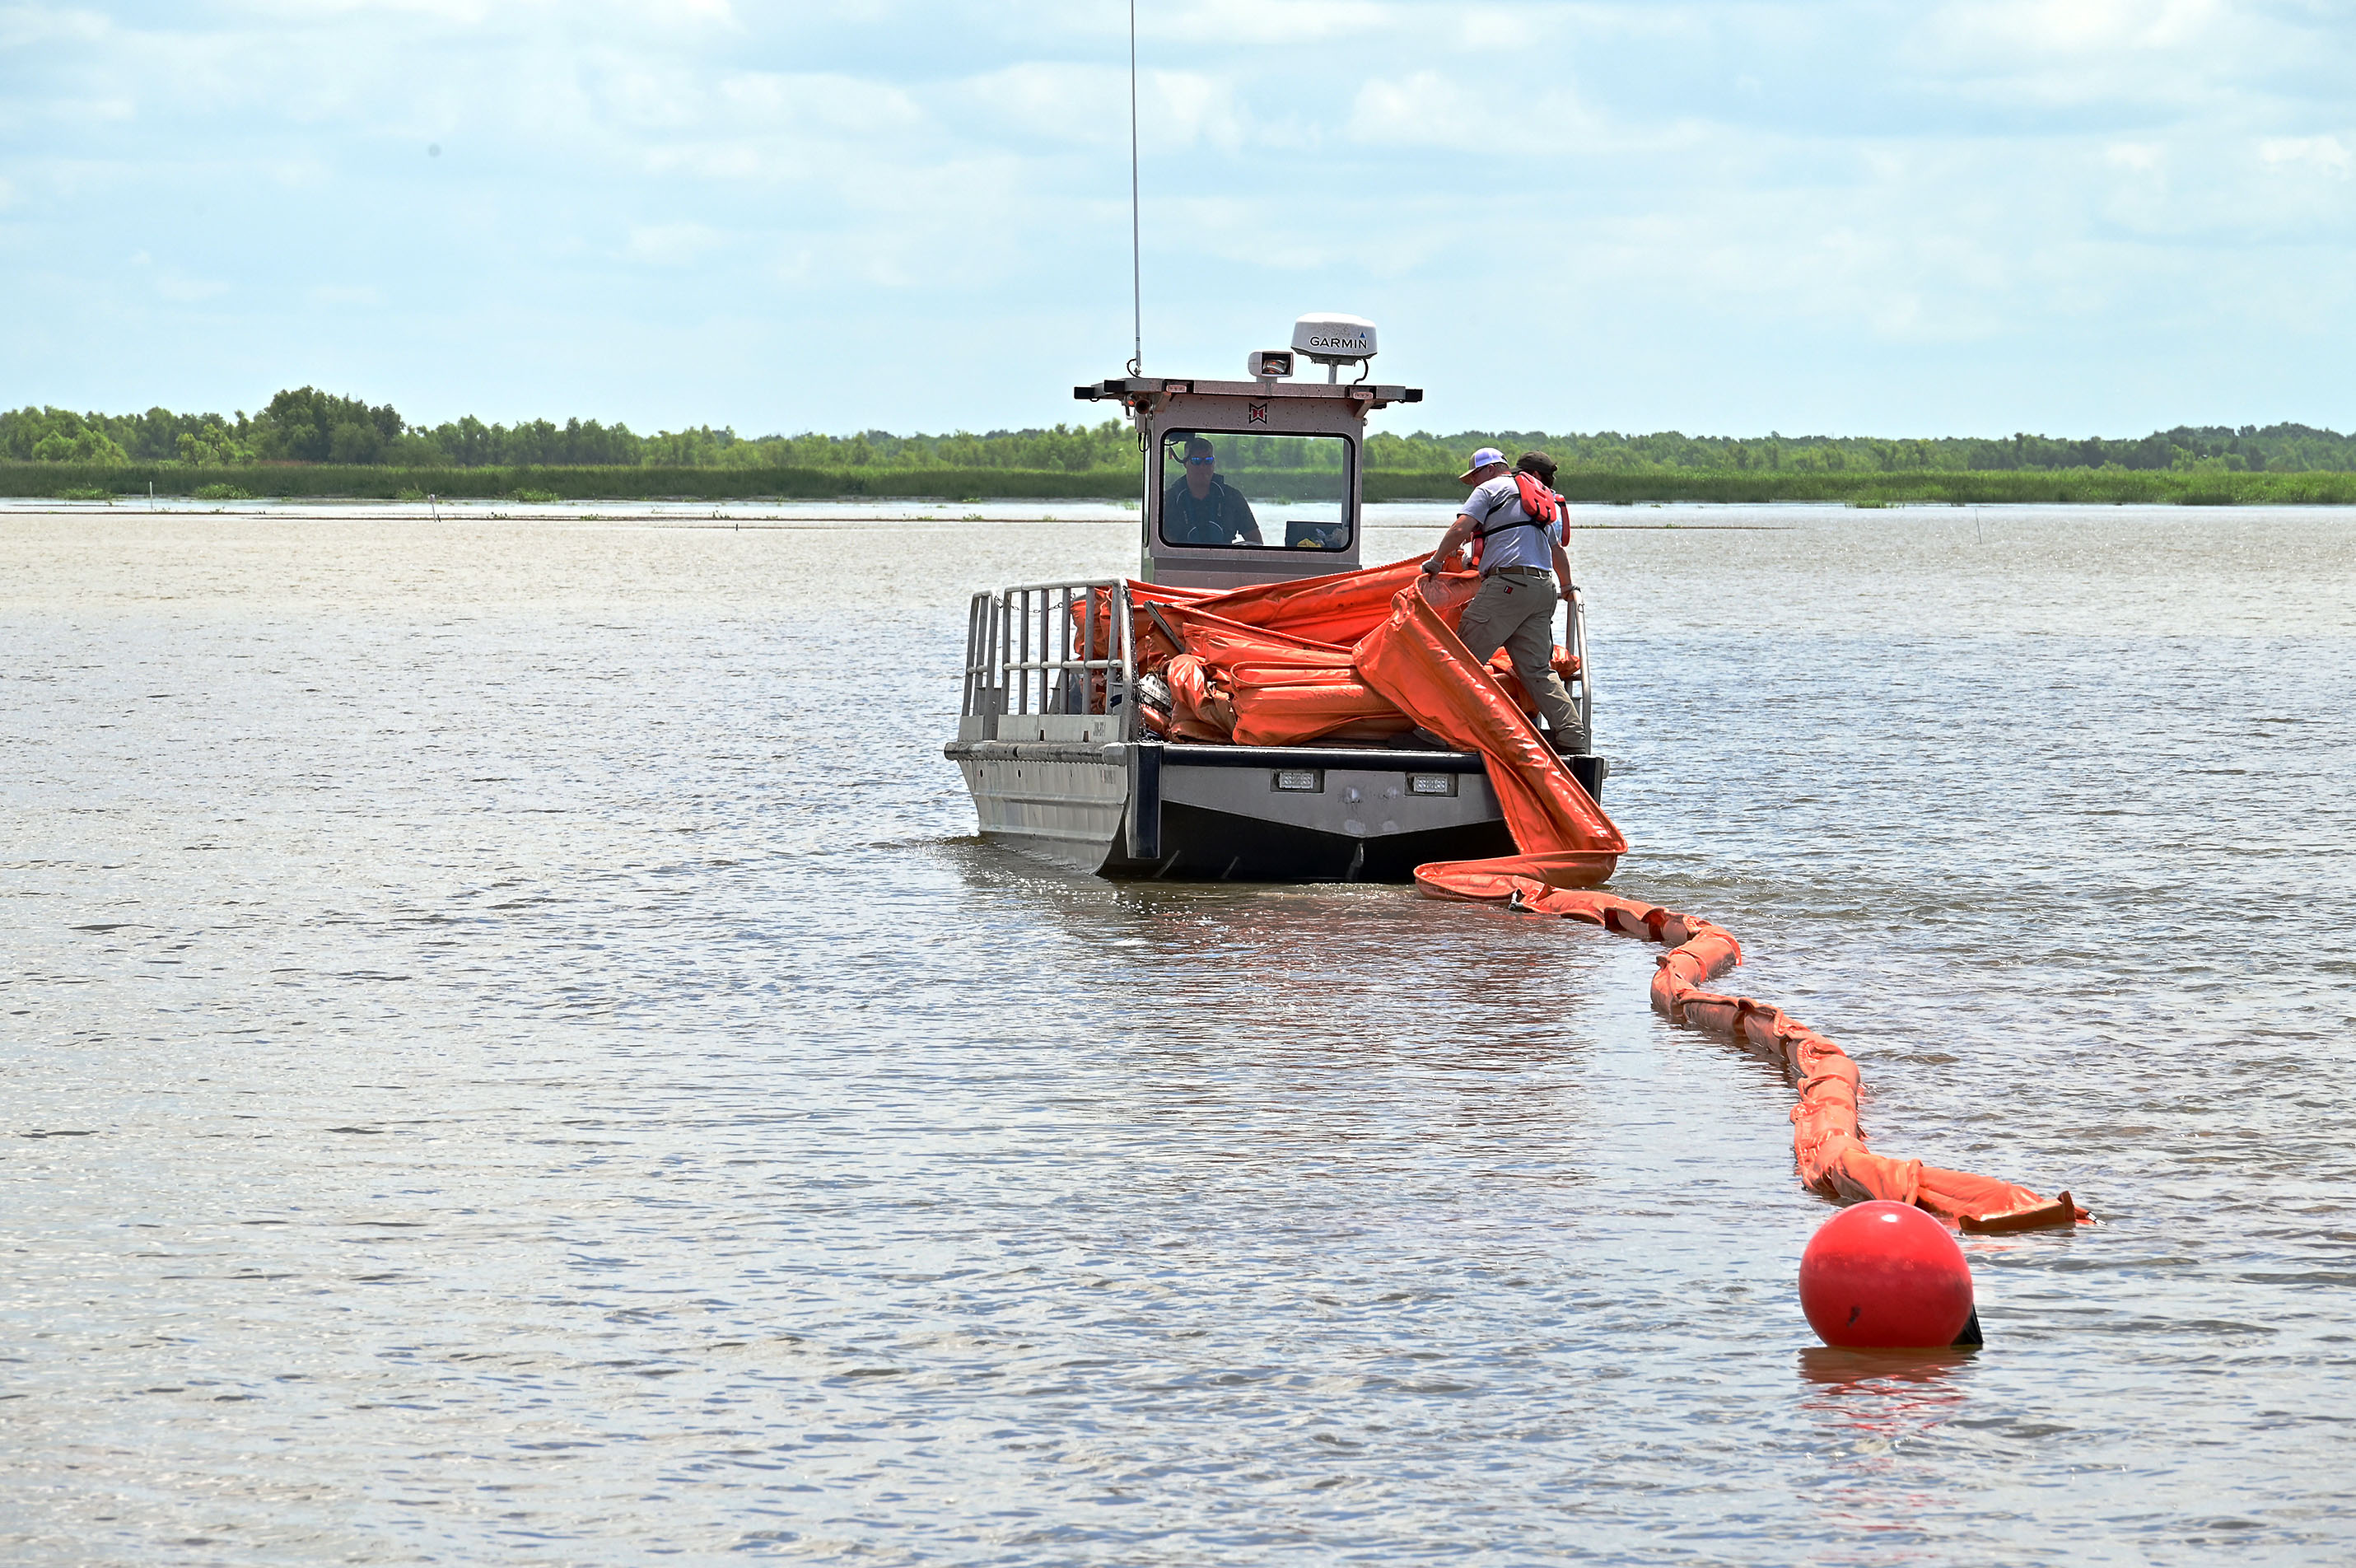 A boat with approximately 600 feet of containment boom is deployed as part of a government initiated unannounced exercise conducted by the Bureau of Safety and Environmental Enforcement Wednesday, June 1, 2022, off the Louisiana coast. A GIUE is a preparedness verification function BSEE employs to witness and evaluate, on a no-notice basis, a plan holder’s capabilities to respond to a hypothetical oil spill.